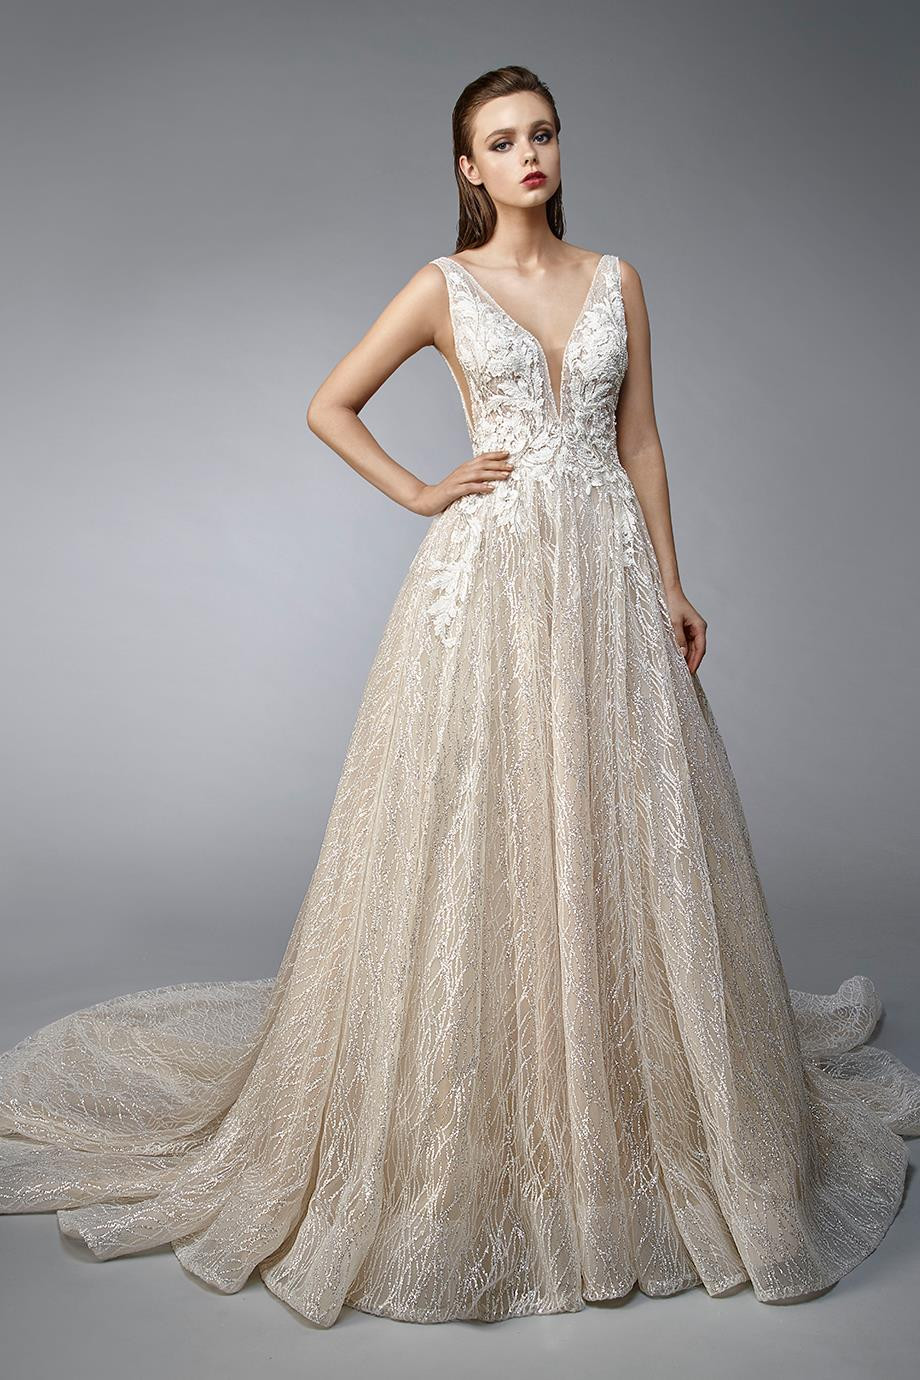 Gold Wedding Dresses & Bridal Gowns hitched.co.uk